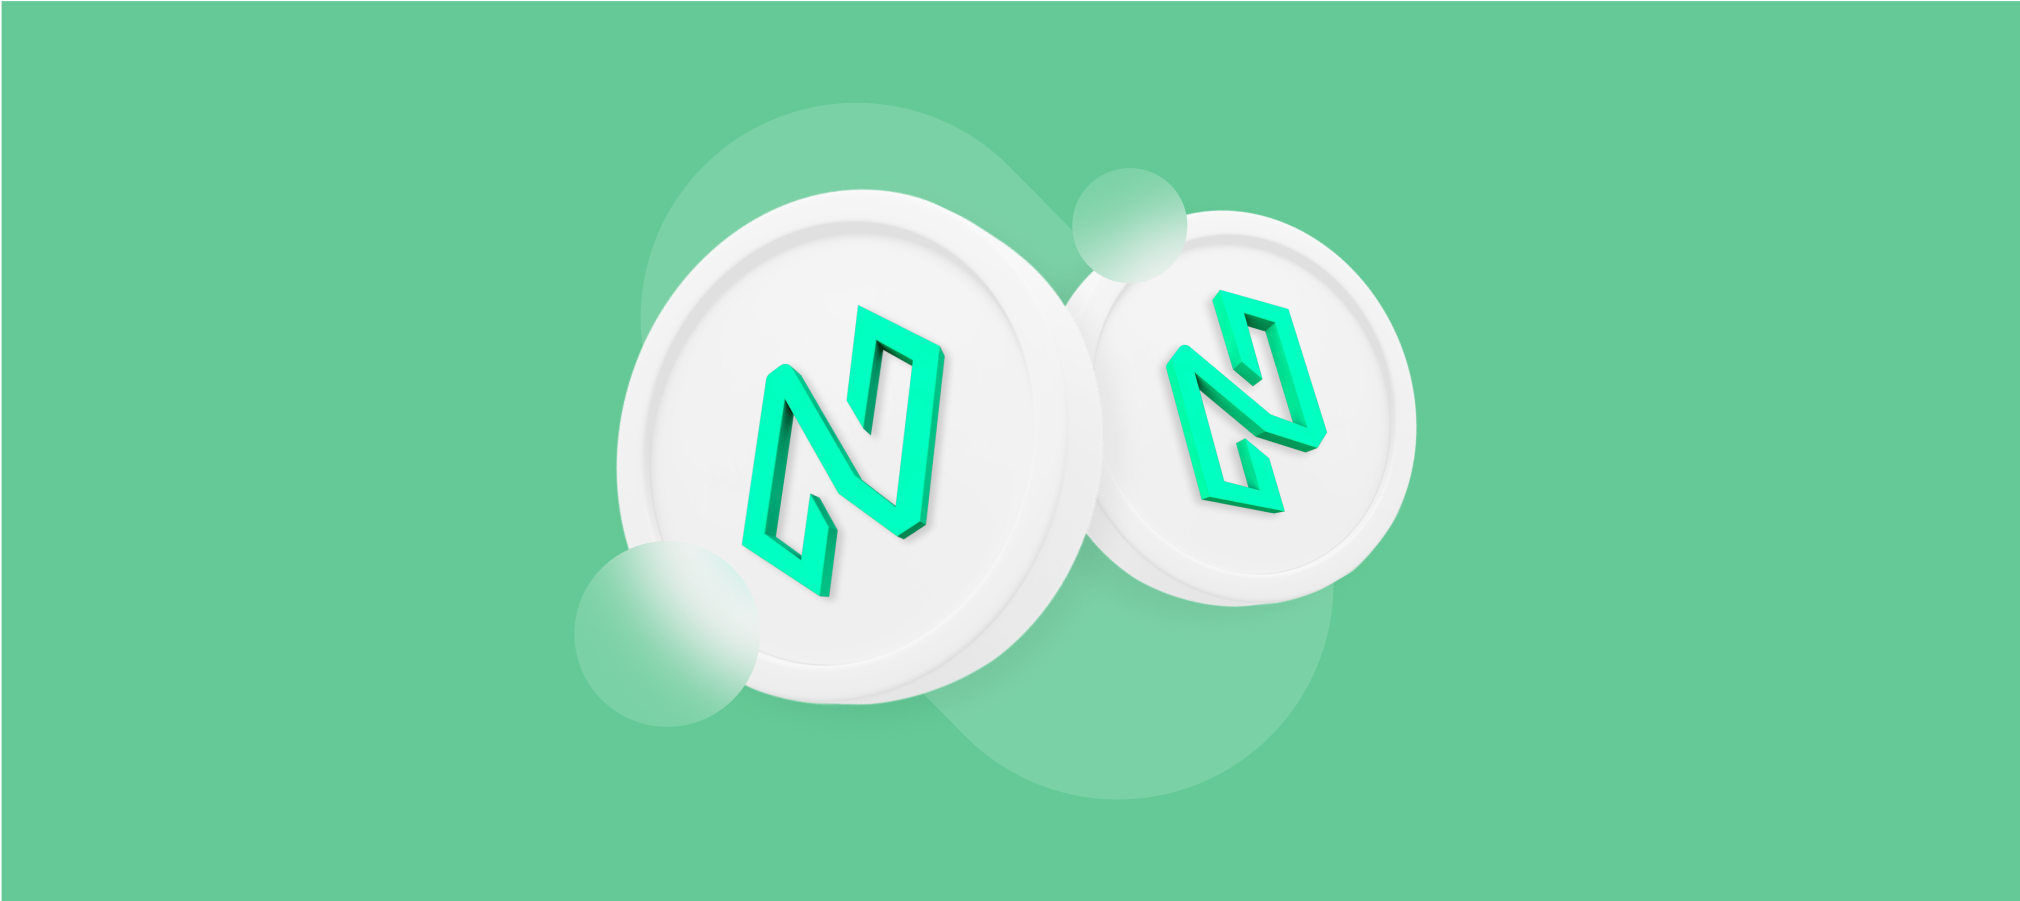 What Is Nuls?